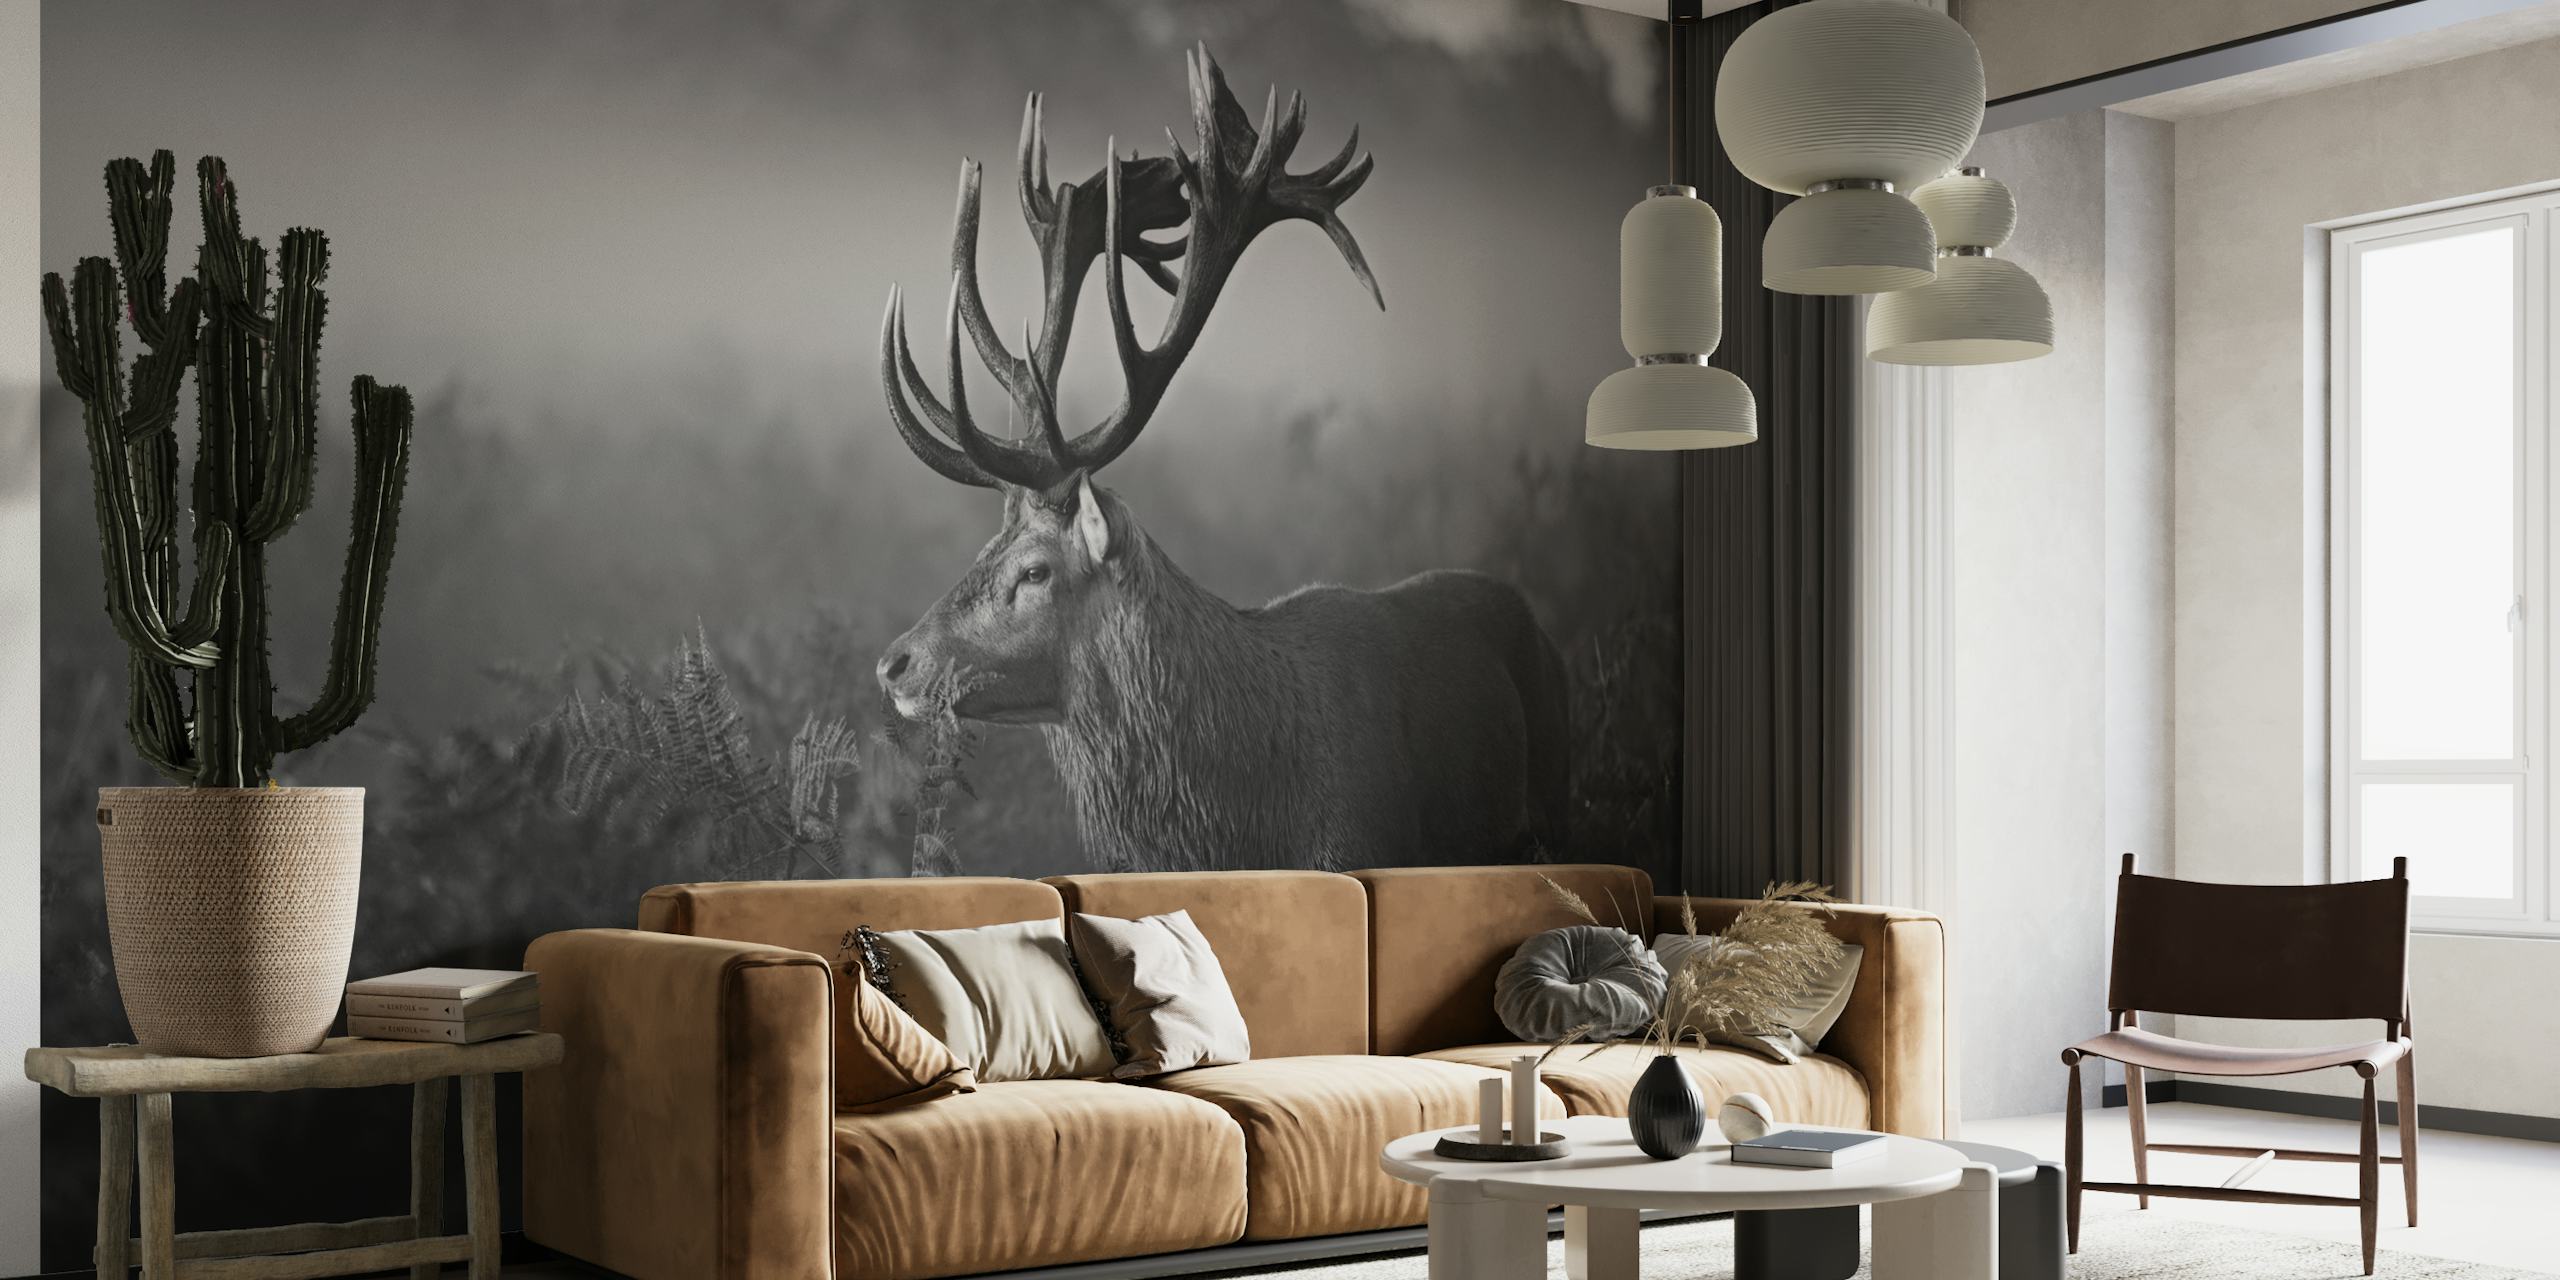 Black and white wall mural featuring a stag in a foggy forest landscape